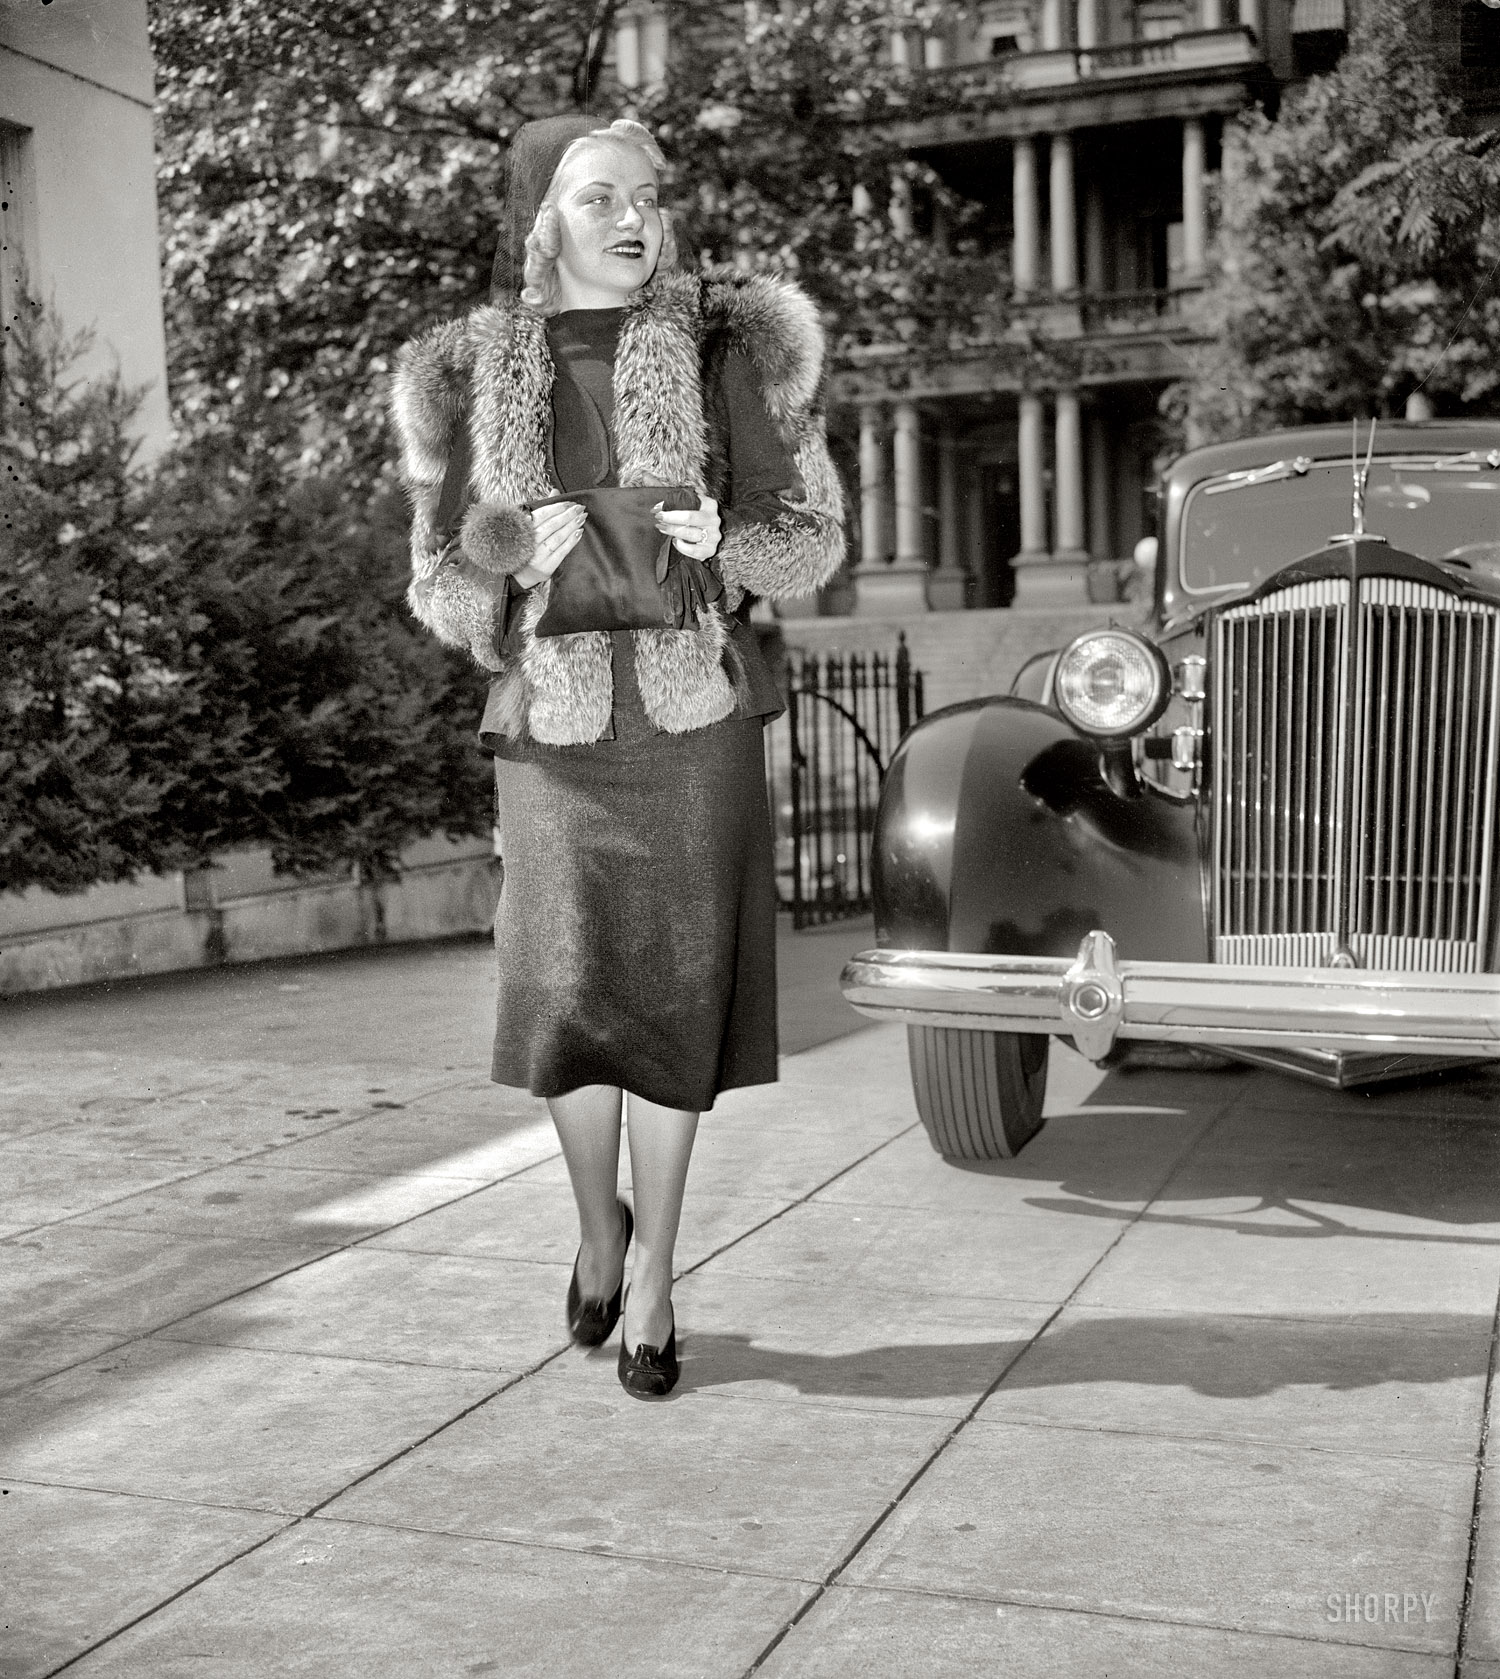 Washington, D.C., circa 1937. "Jane Grier." Pictured with a Packard near the old State, War and Navy building. Harris & Ewing Collection. View full size.